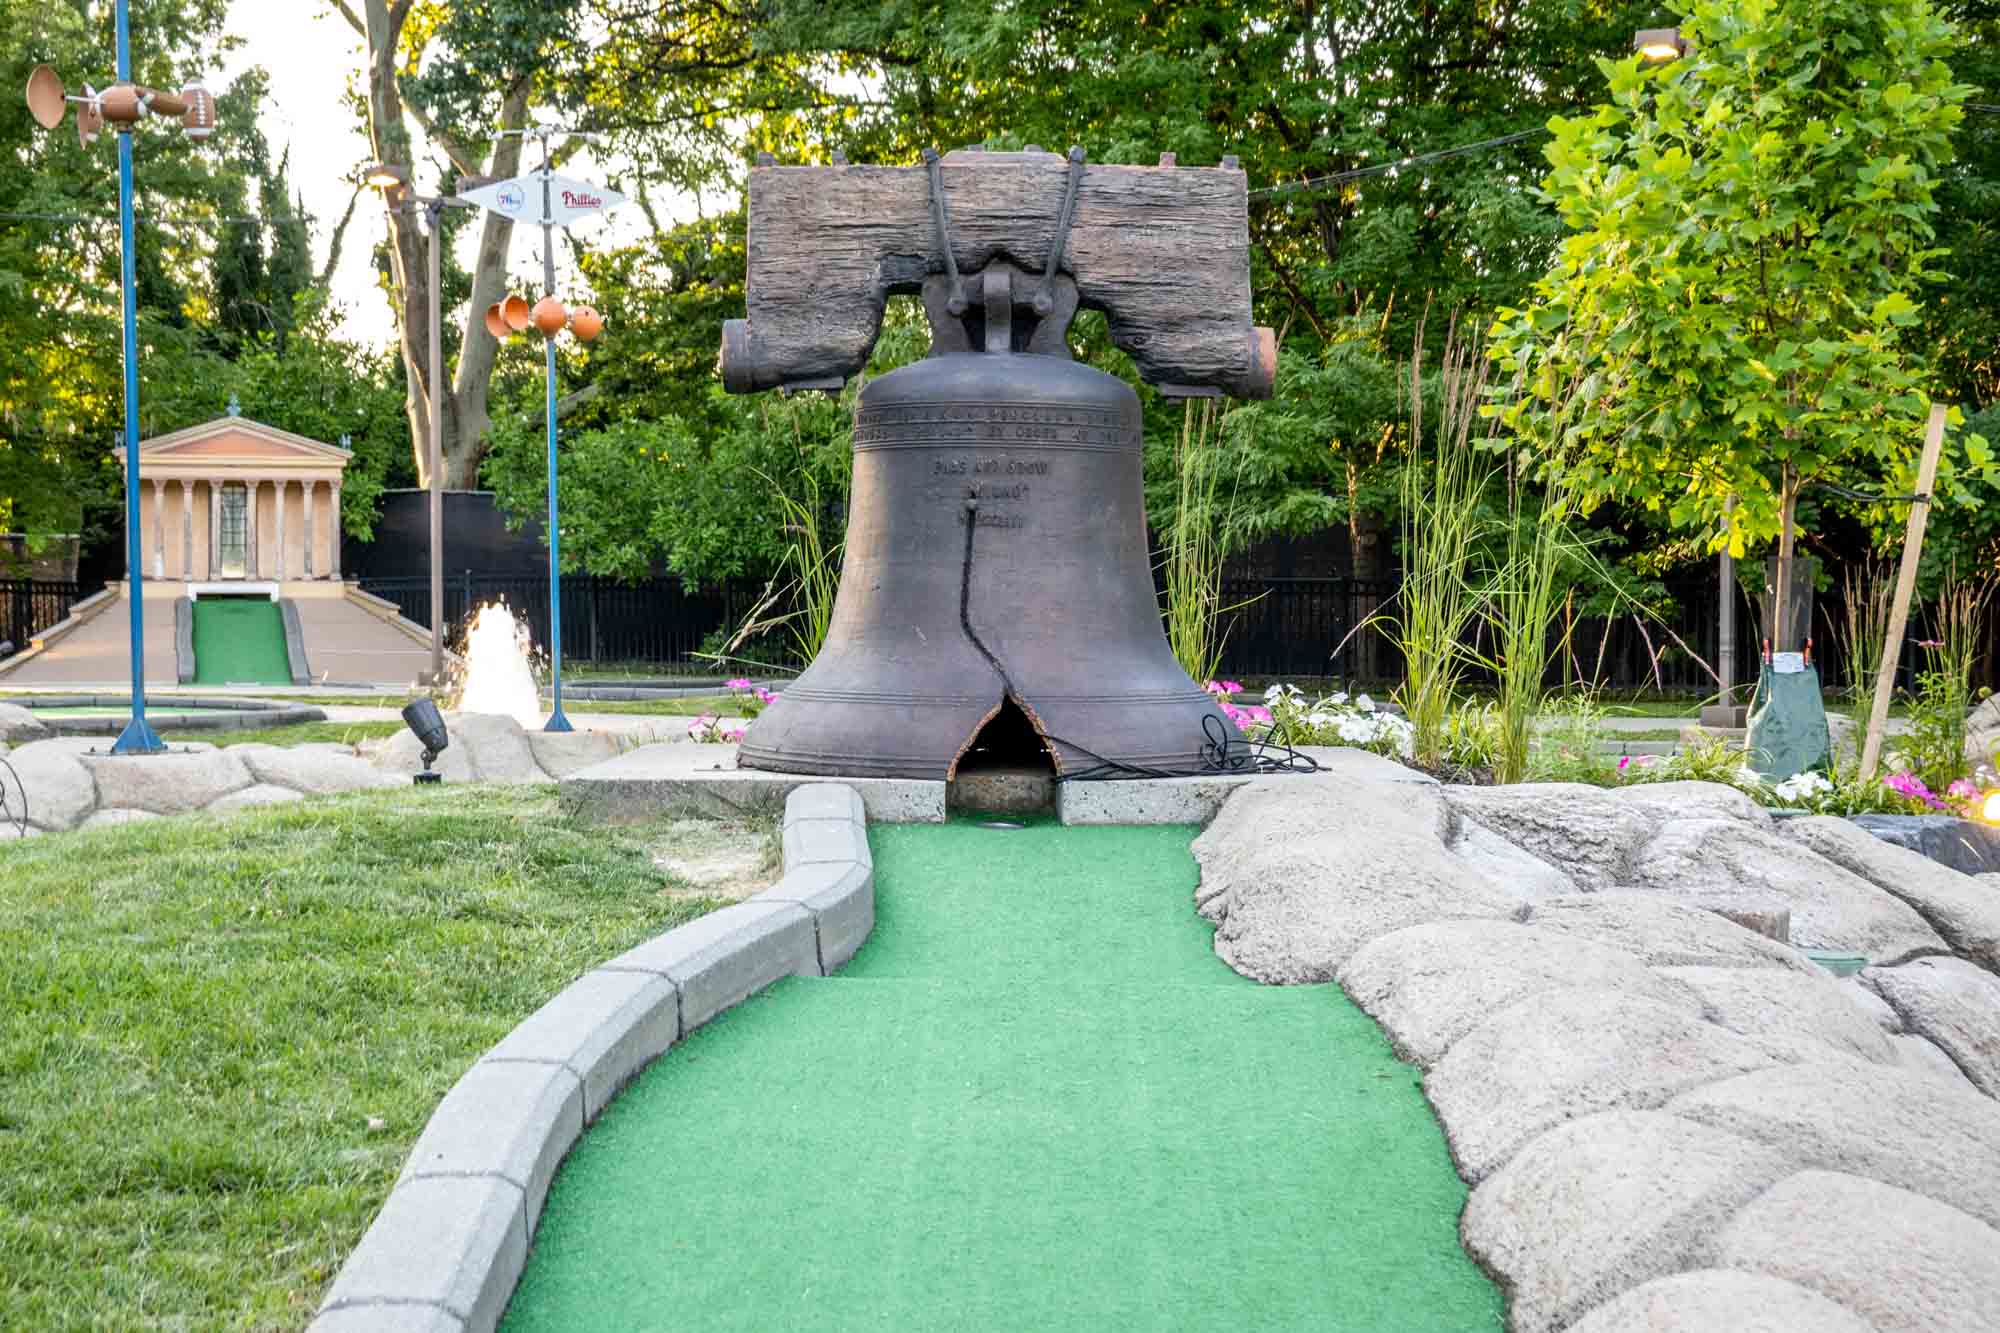 The Liberty Bell replica at a hole on a mini-golf course